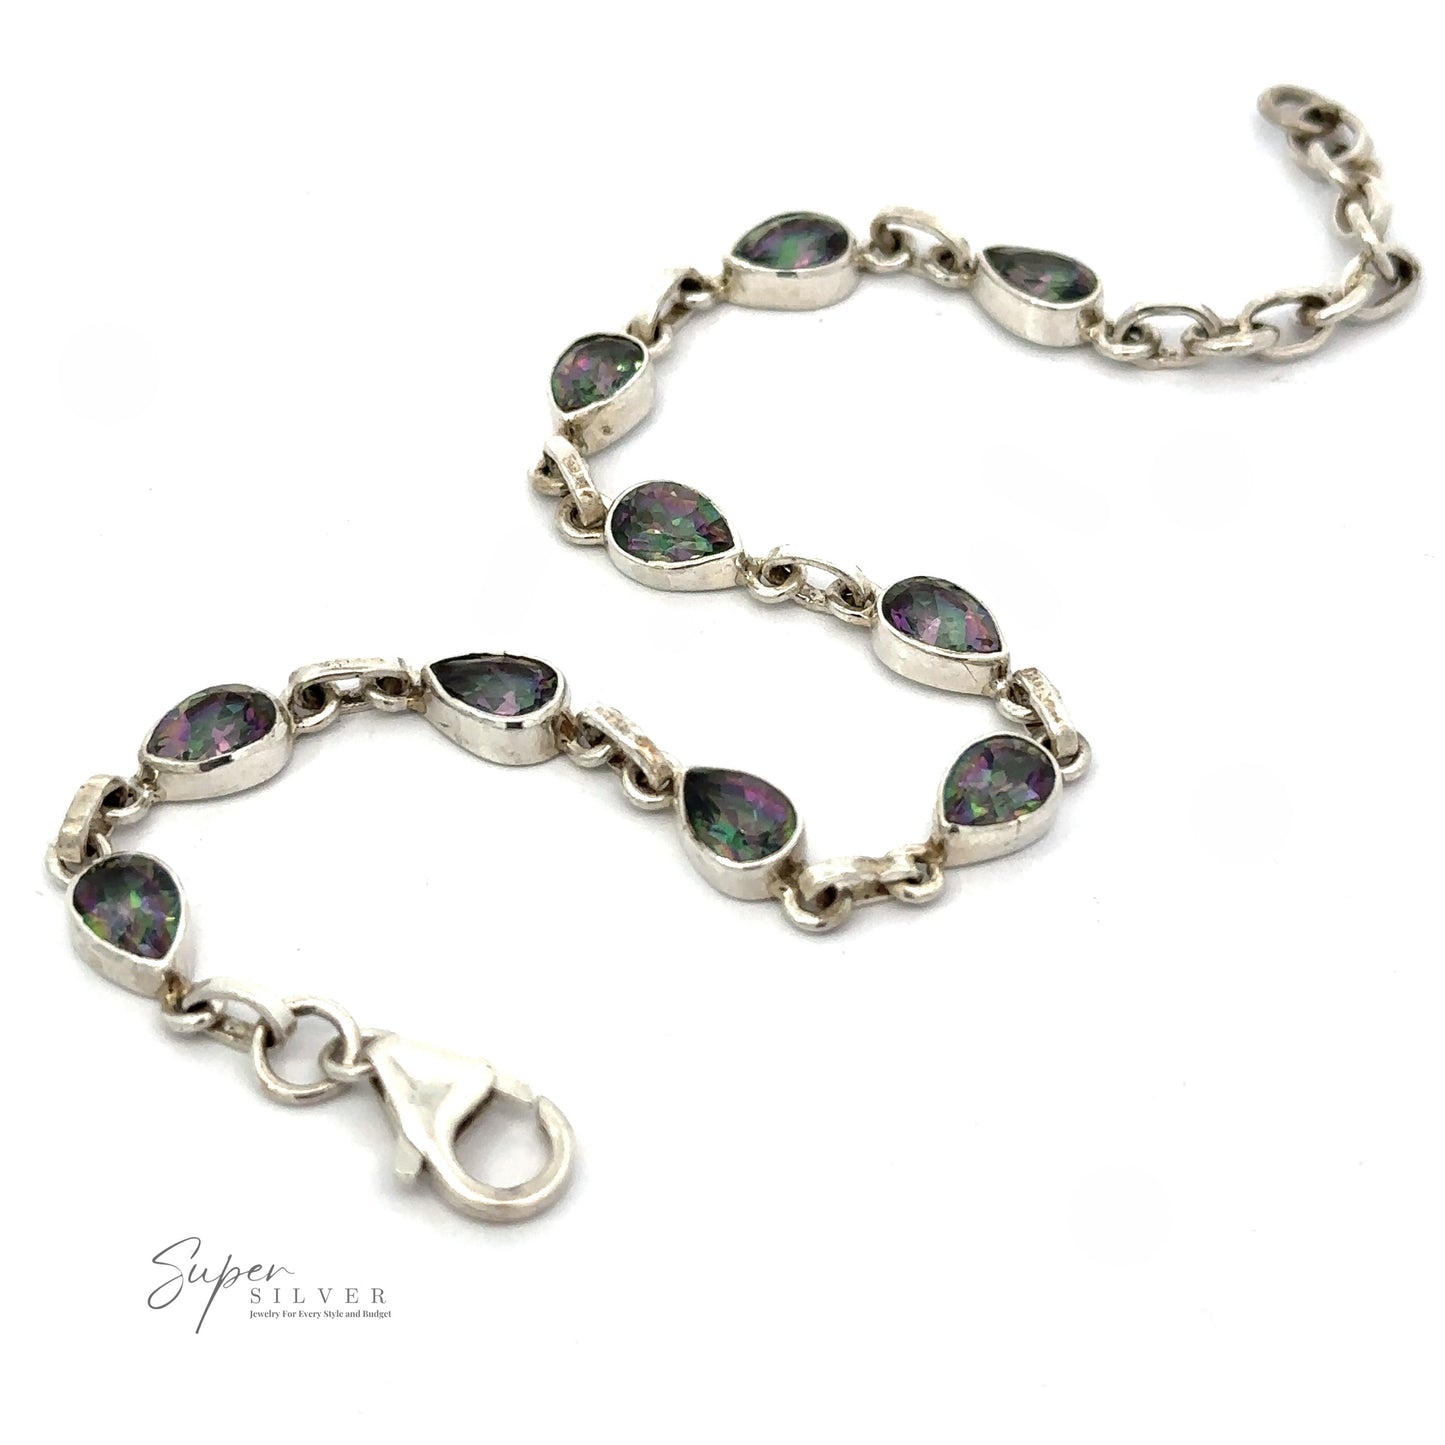 
                  
                    A Rainbow Mystic Topaz Teardrop Shape Link Bracelet featuring teardrop-shaped mystic topaz gemstones with a clasp fastener, on a white background. The brand "Super Silver" is visible in the bottom left corner.
                  
                